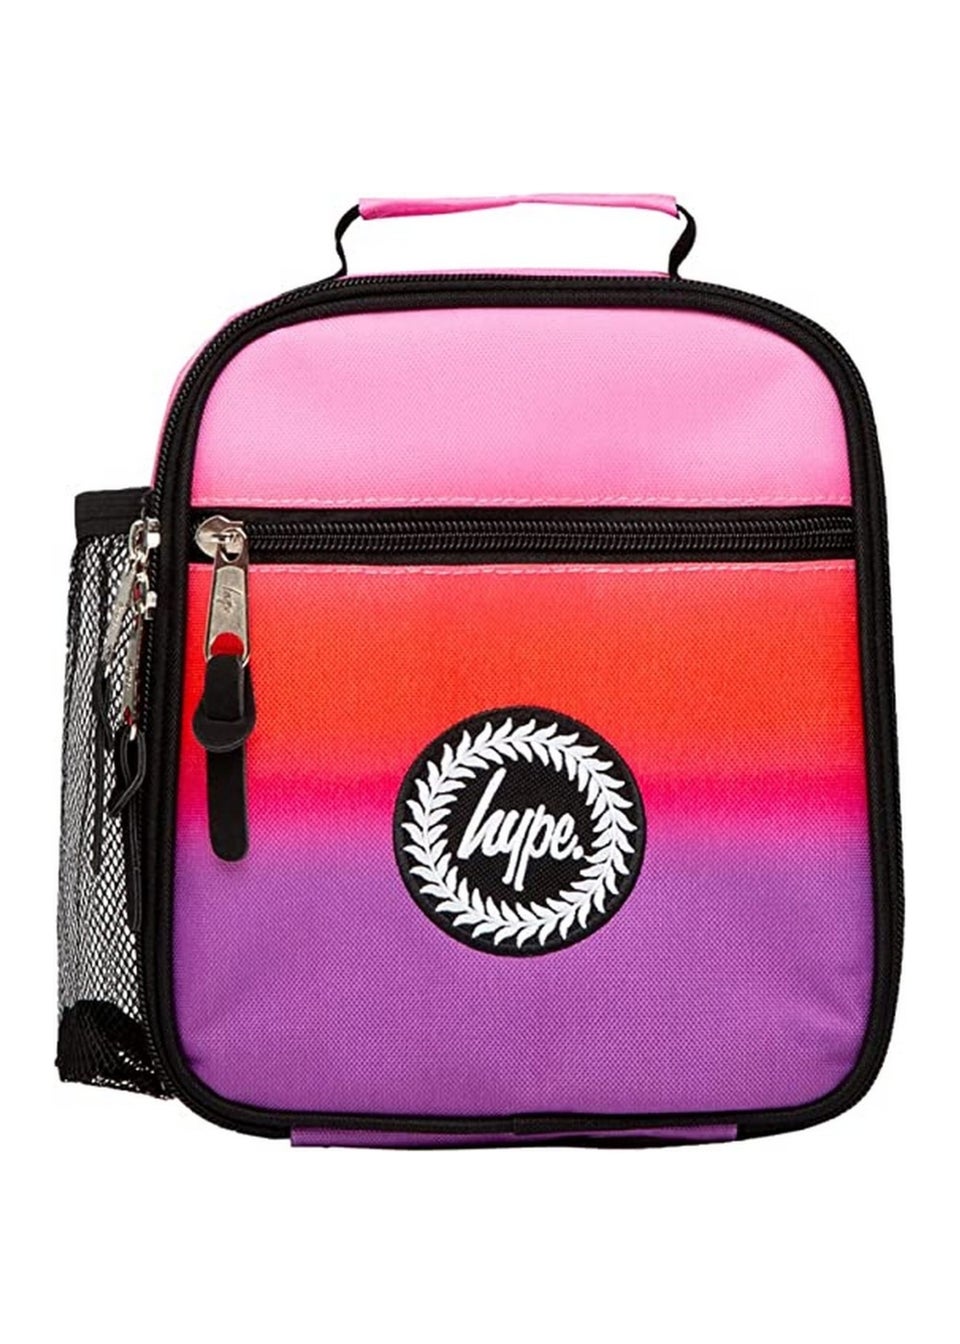 Hype Pink Fade Lunch Bag